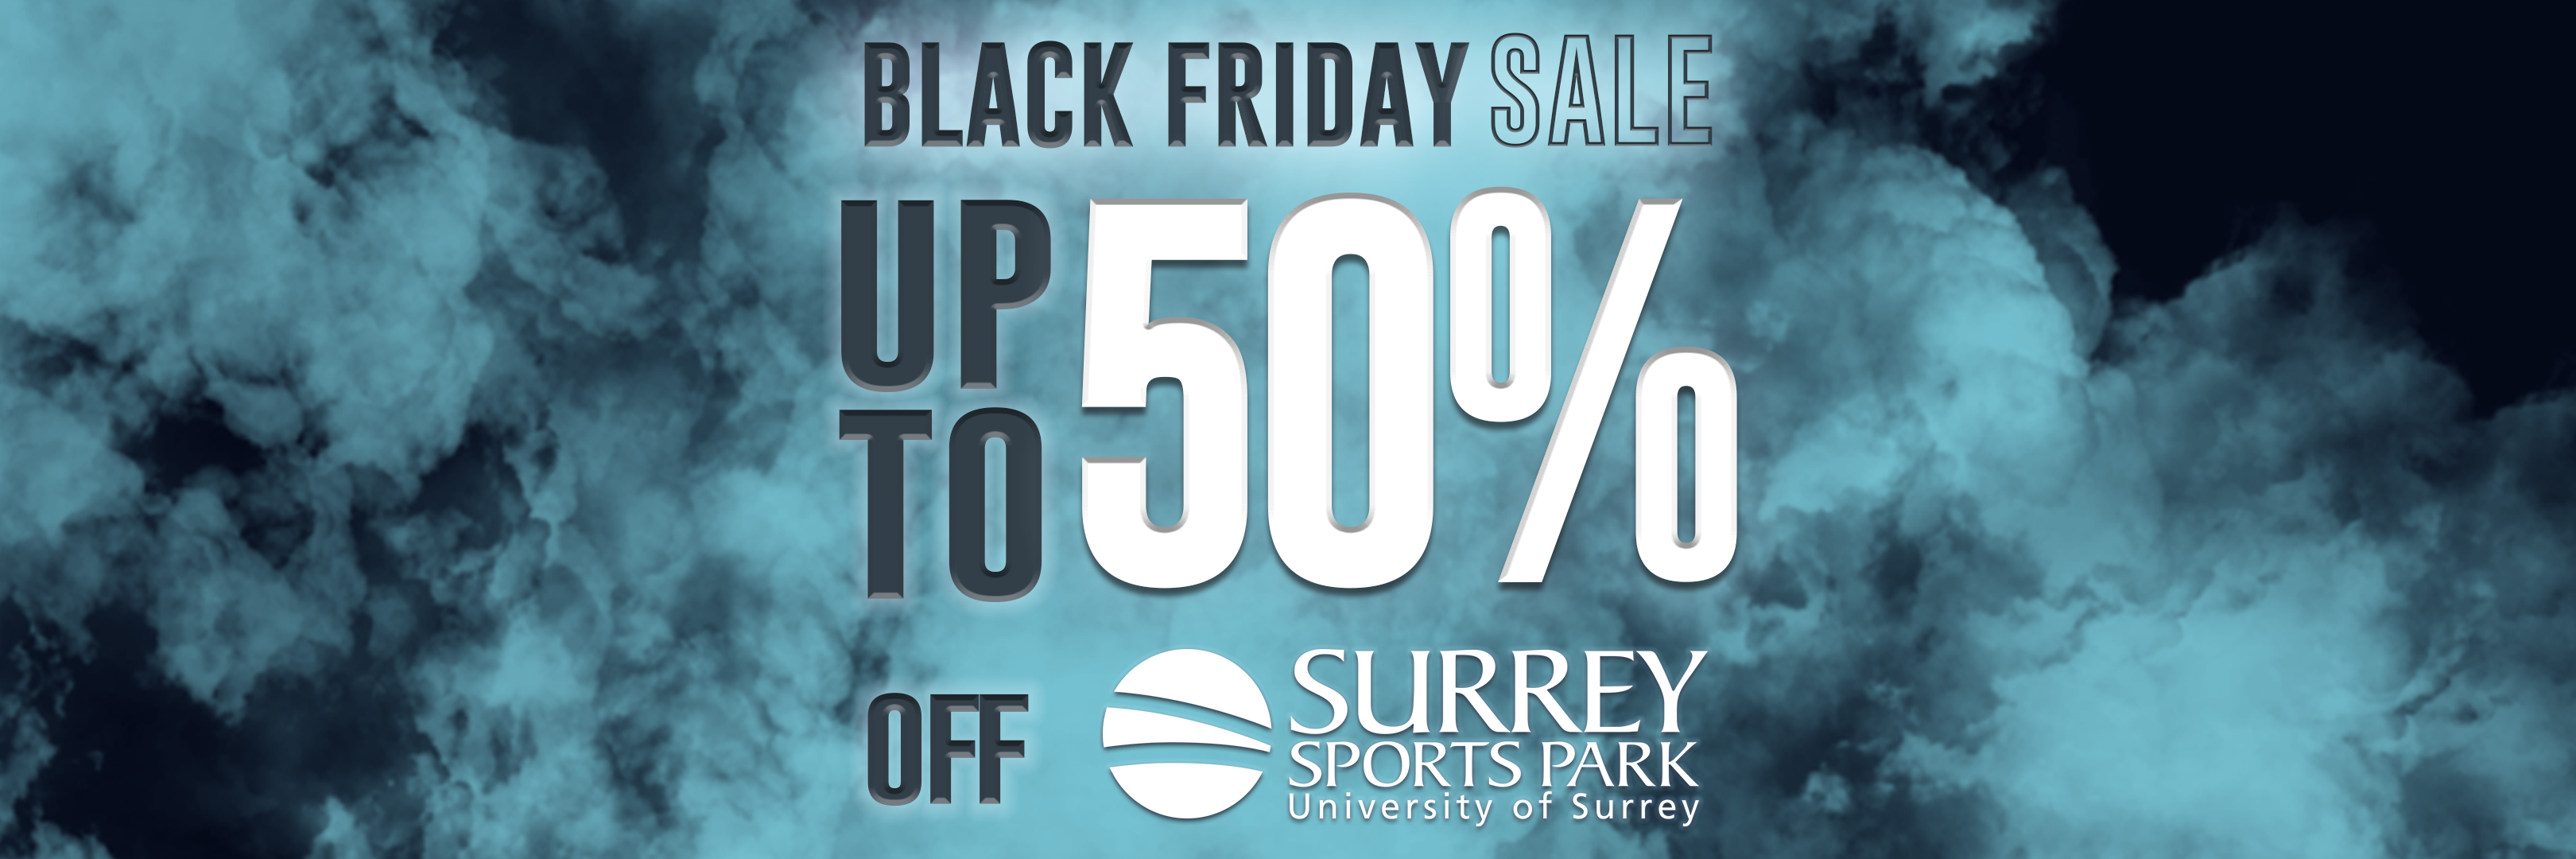 Up to 50% off at SSP this Black Friday weekend